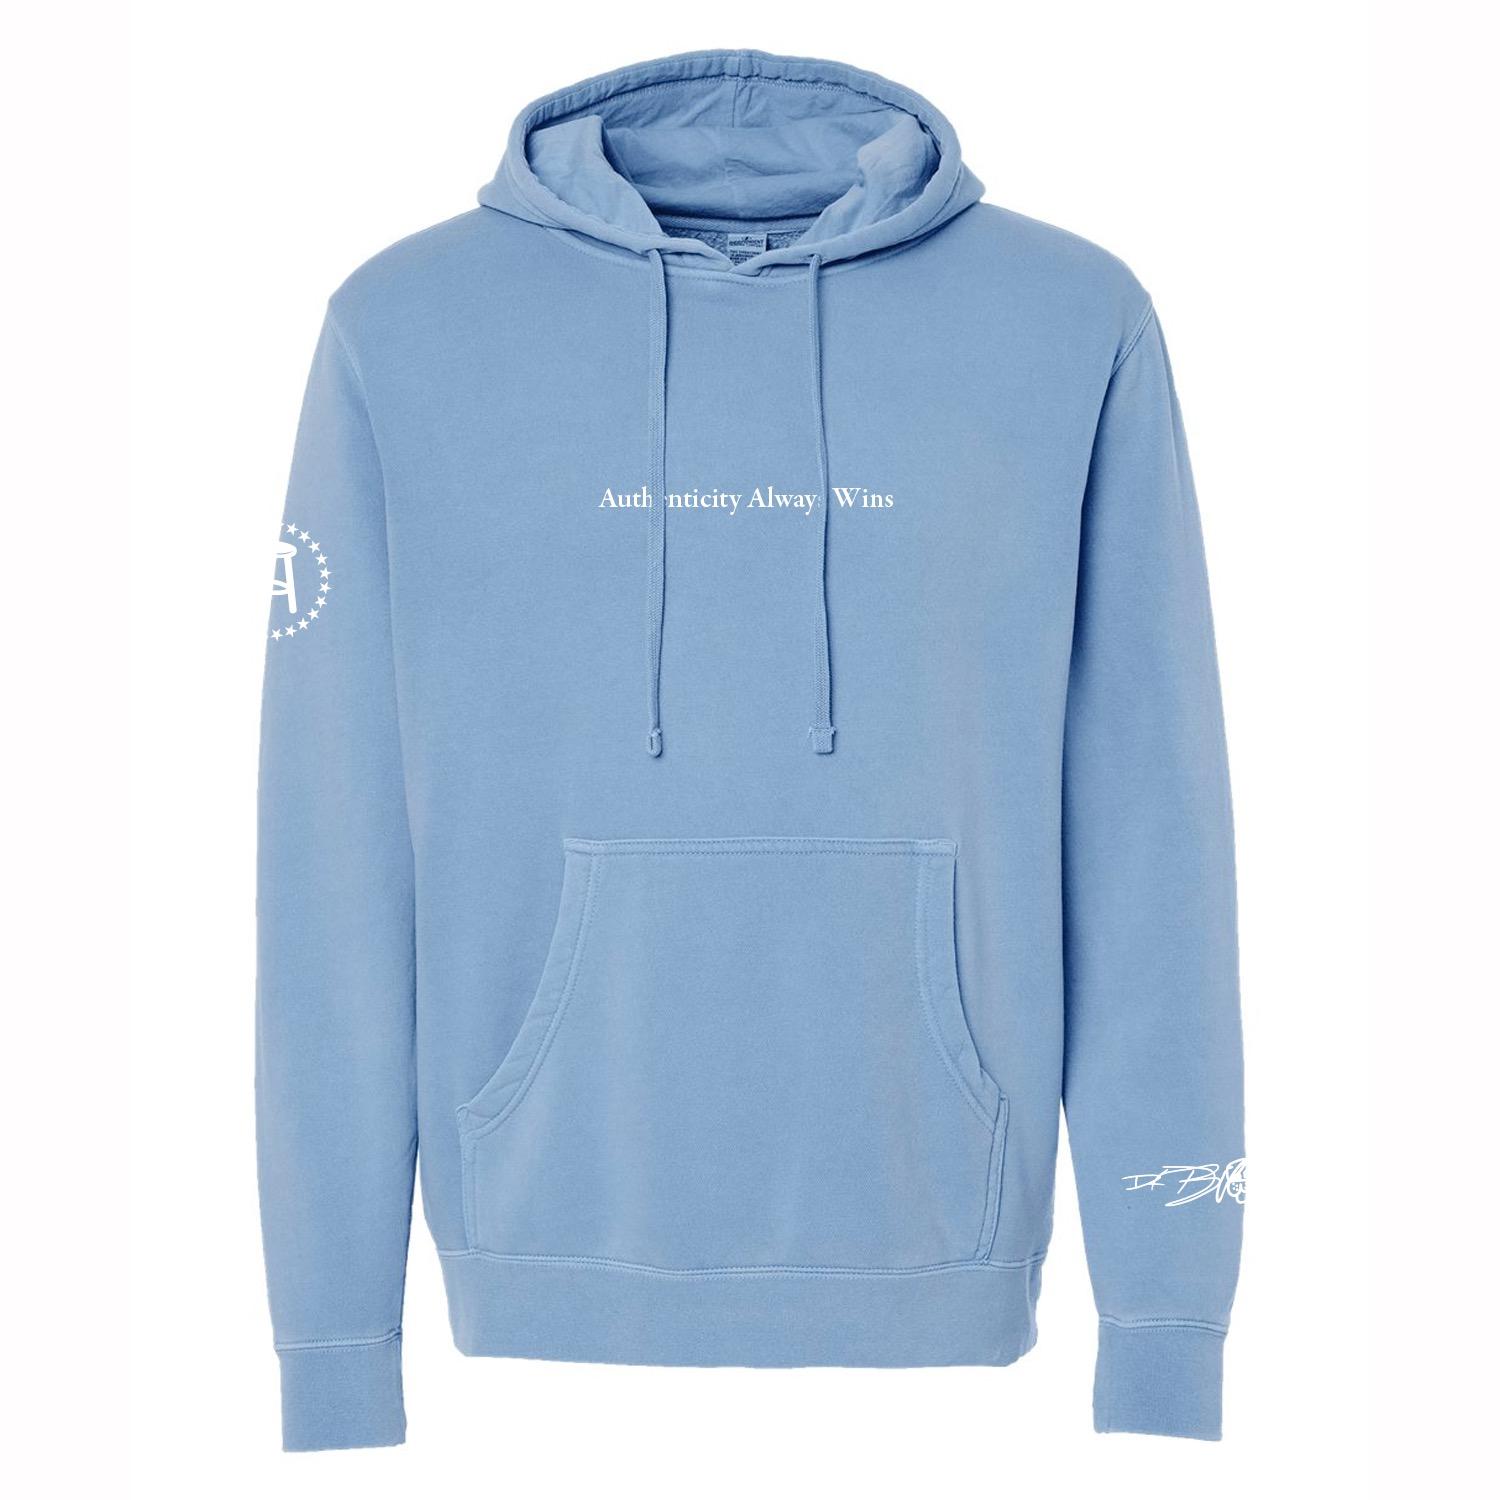 Authenticity Always Wins Pigment Dyed Hoodie-Hoodies & Sweatshirts-Barstool Sports-Barstool Sports